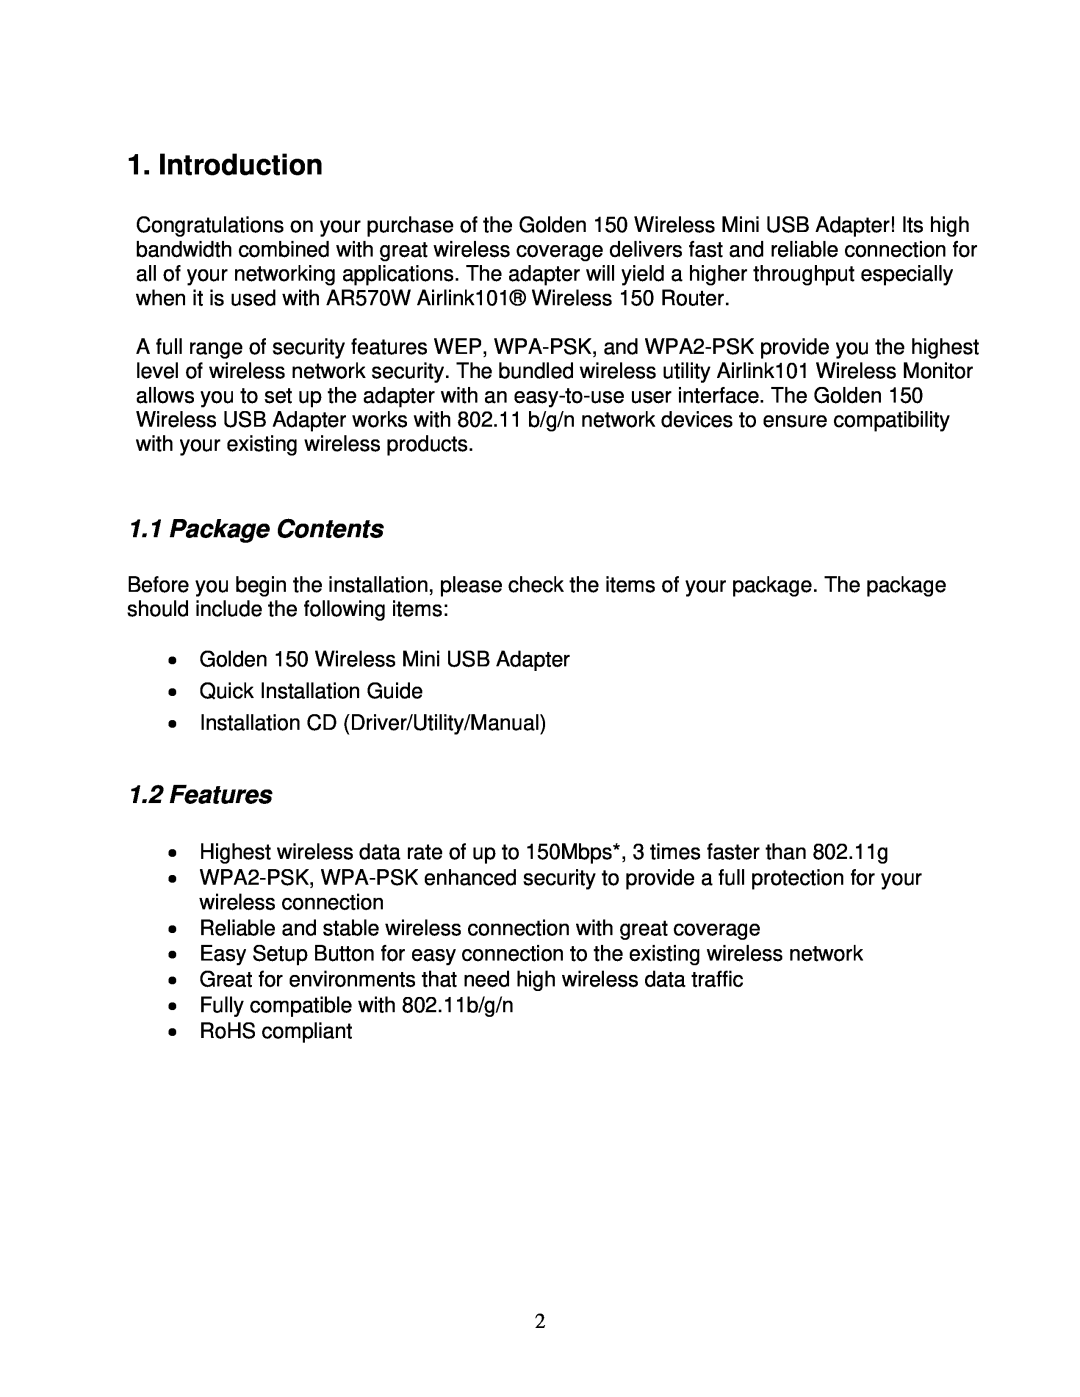 Airlink101 AWLL5077 user manual Introduction, Package Contents, Features 